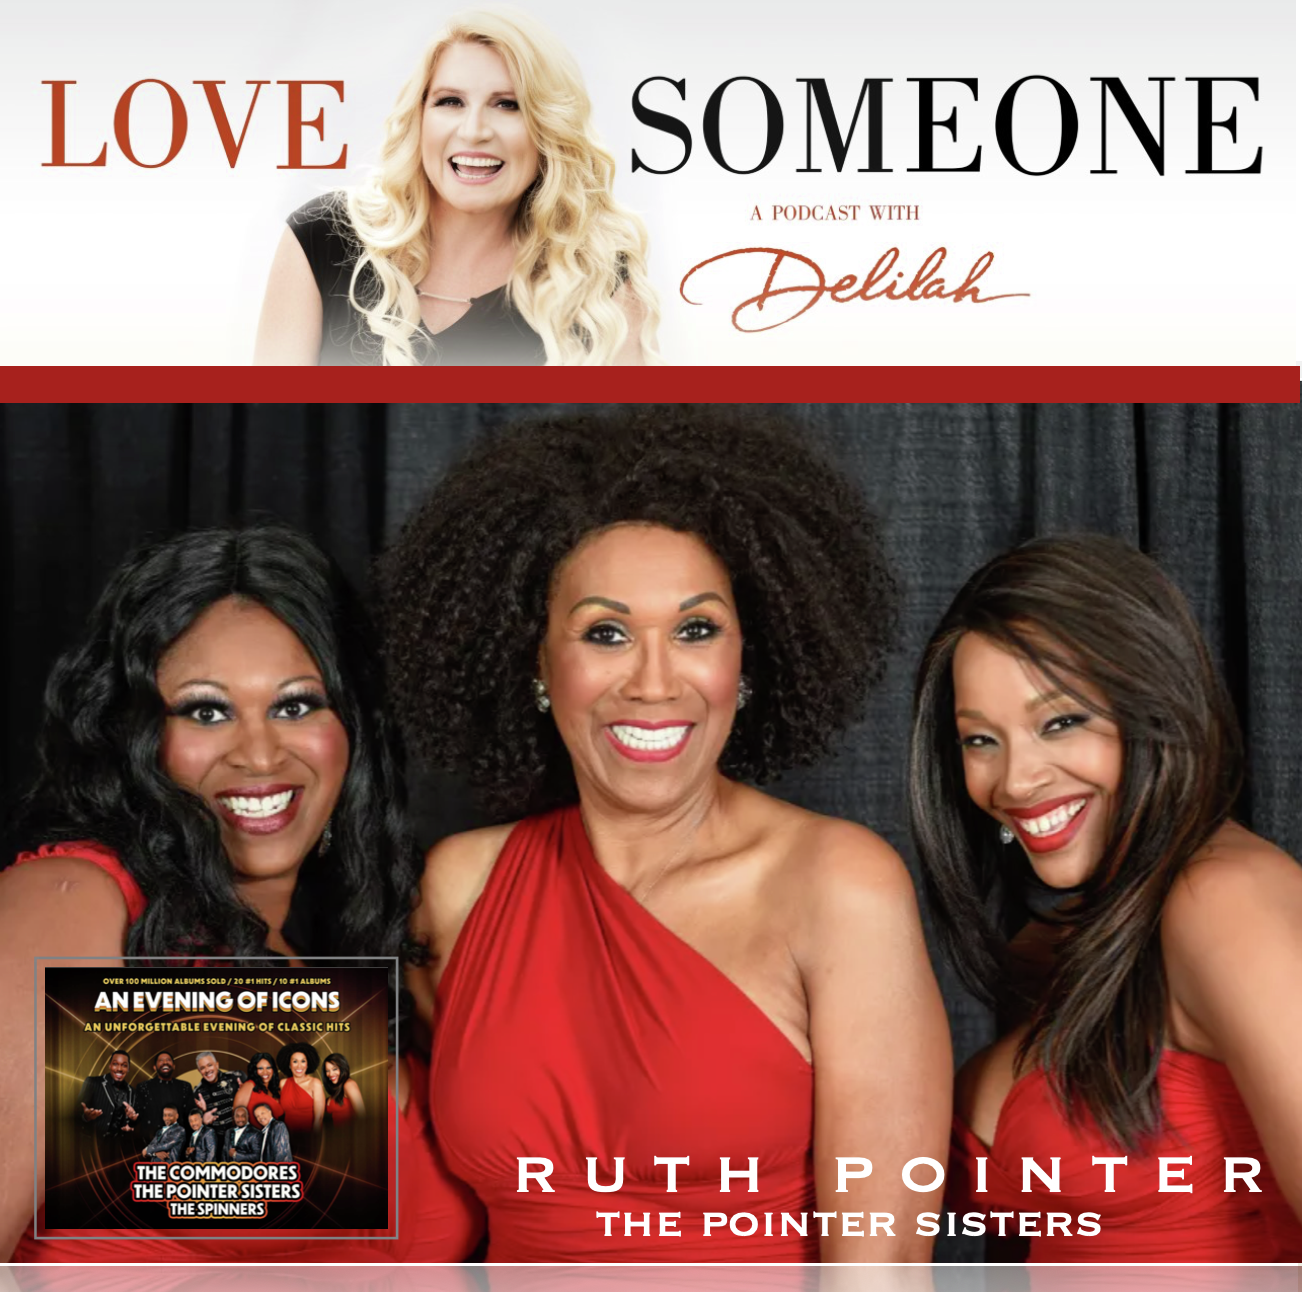 RUTH POINTER: The Pointer Sisters, "An Evening of Icons"